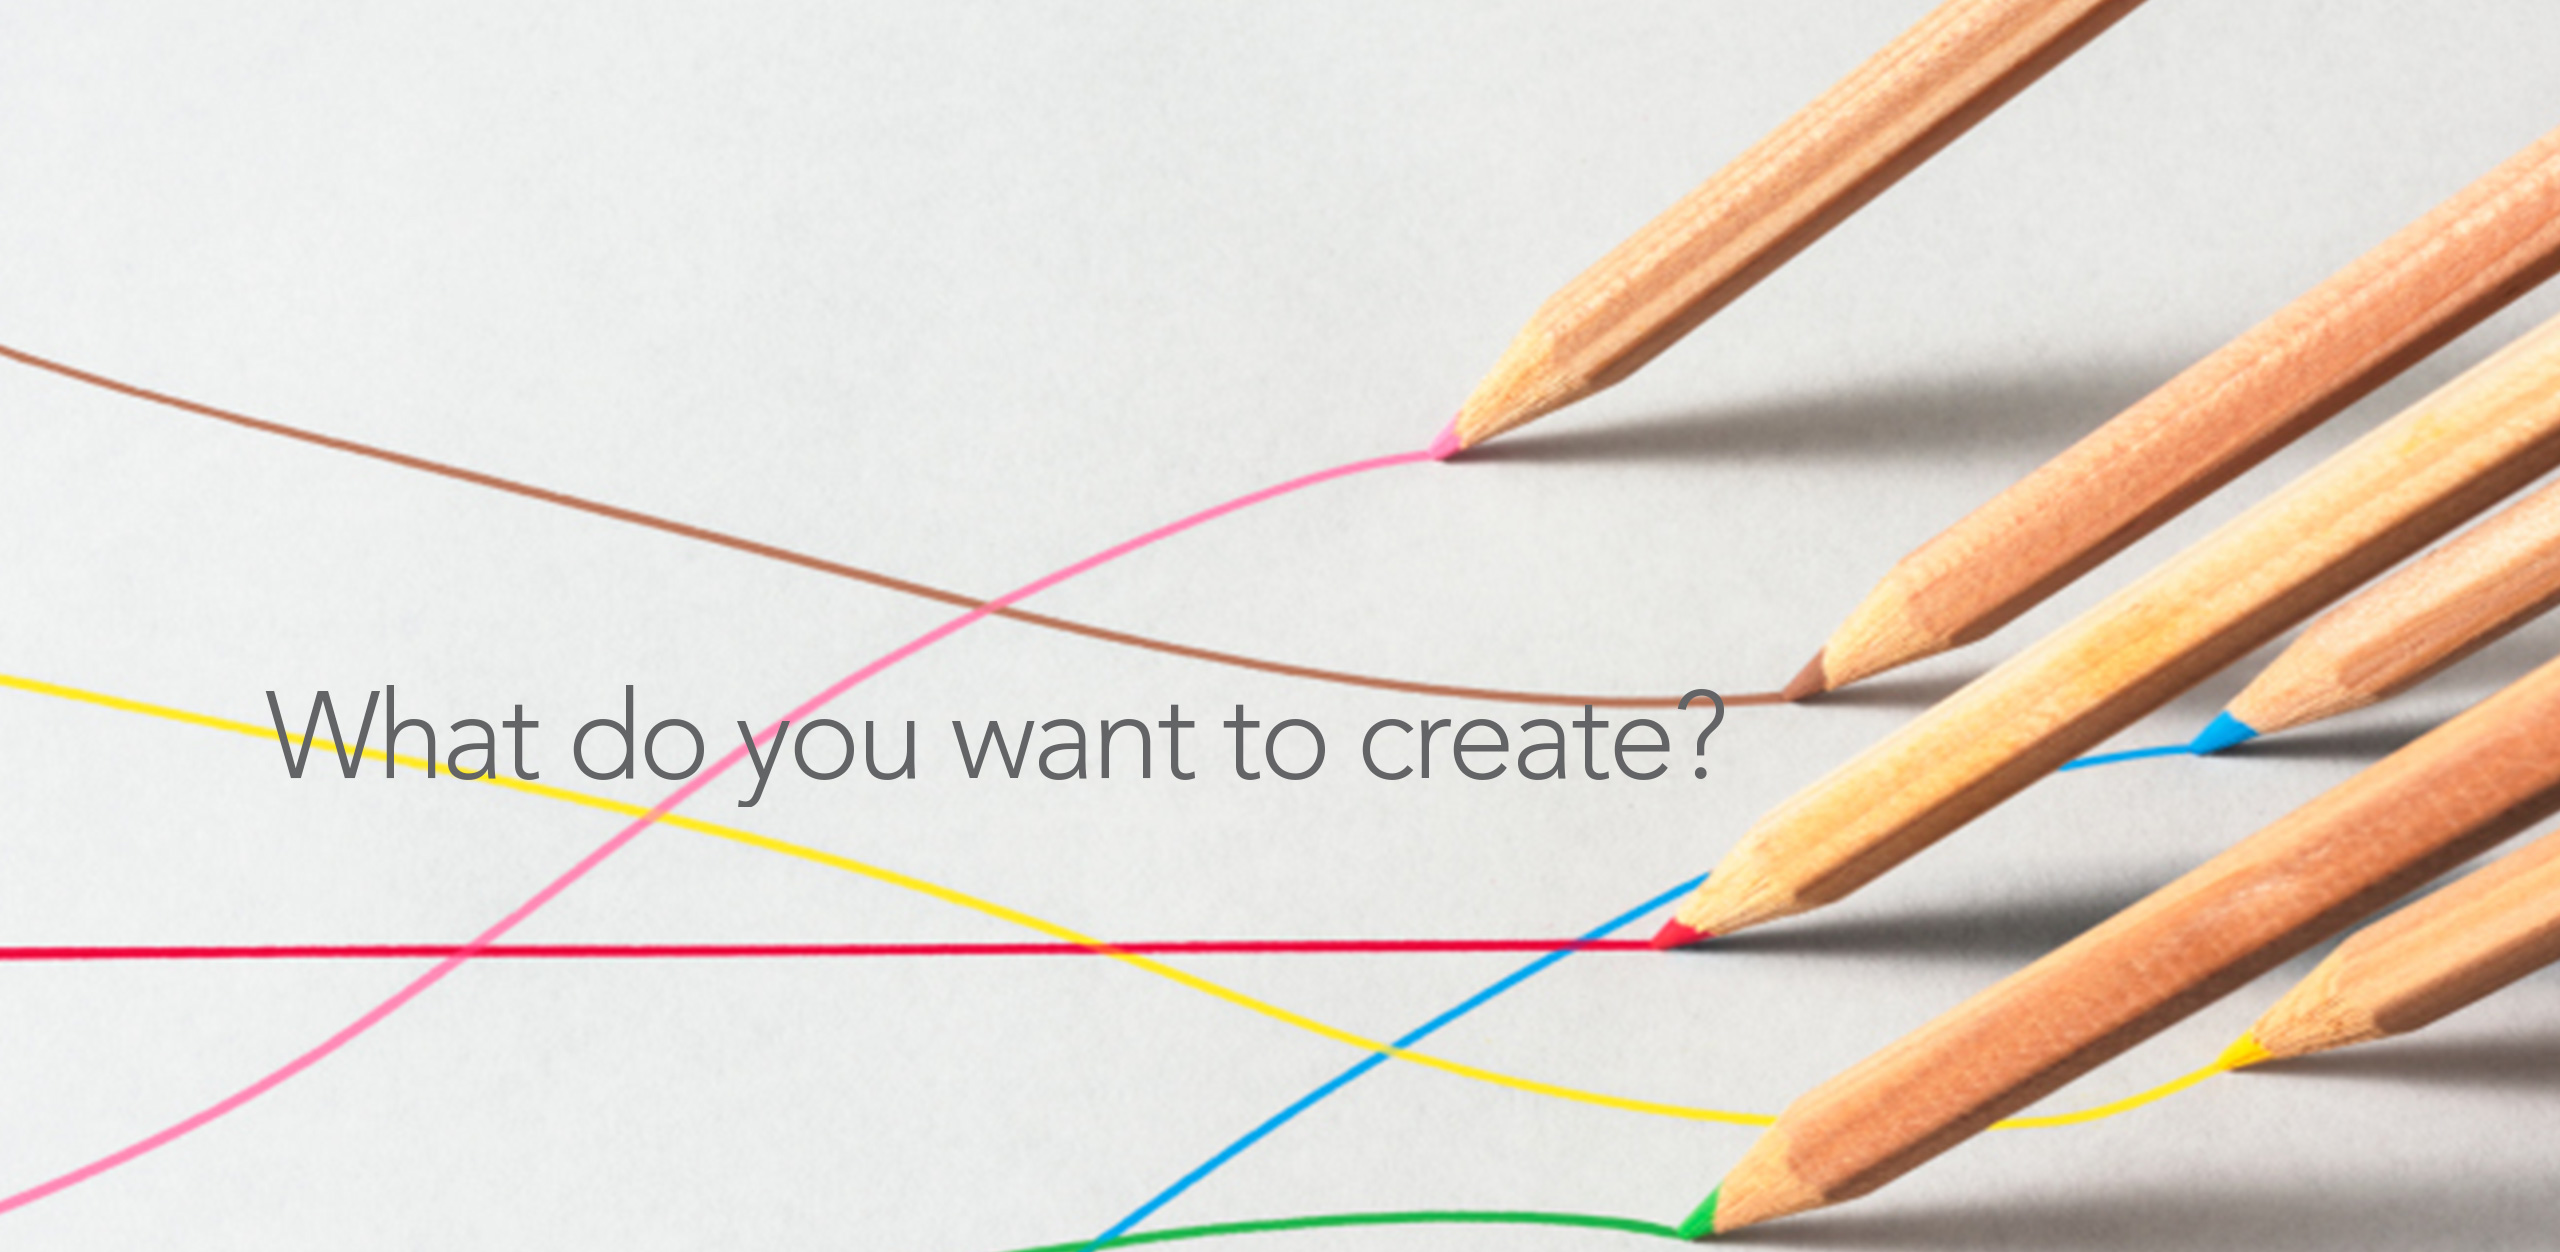 What do you want to create?